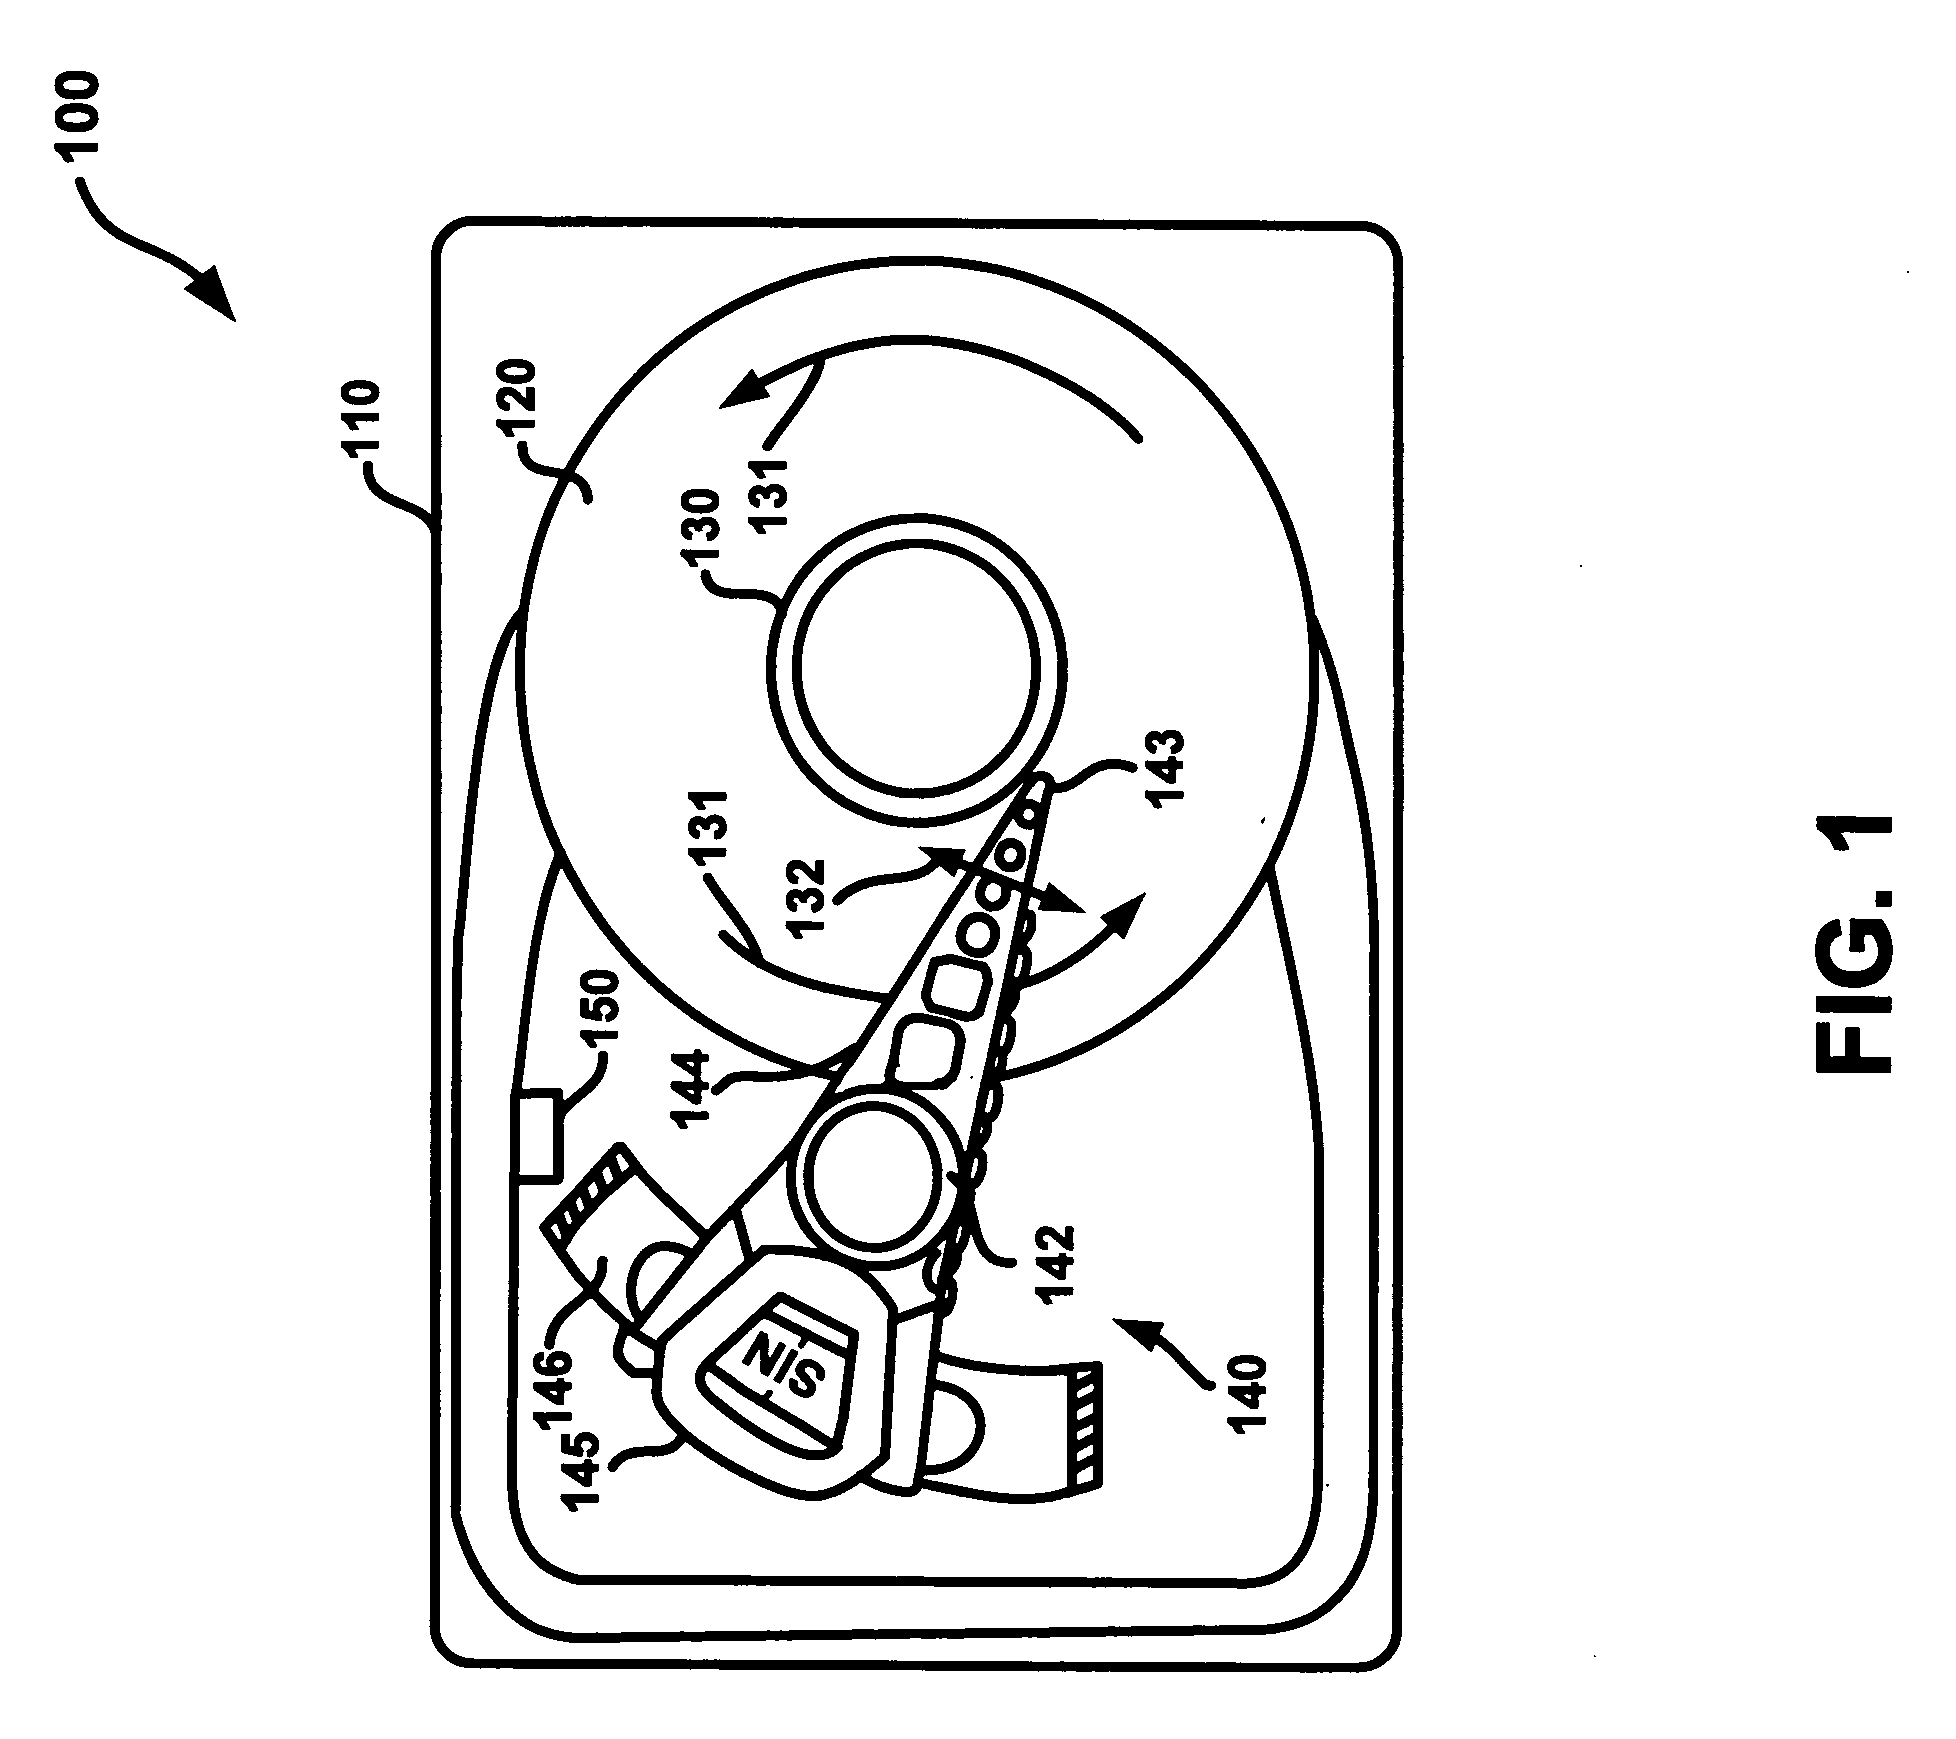 Components and assembly procedure for thermal assisted recording